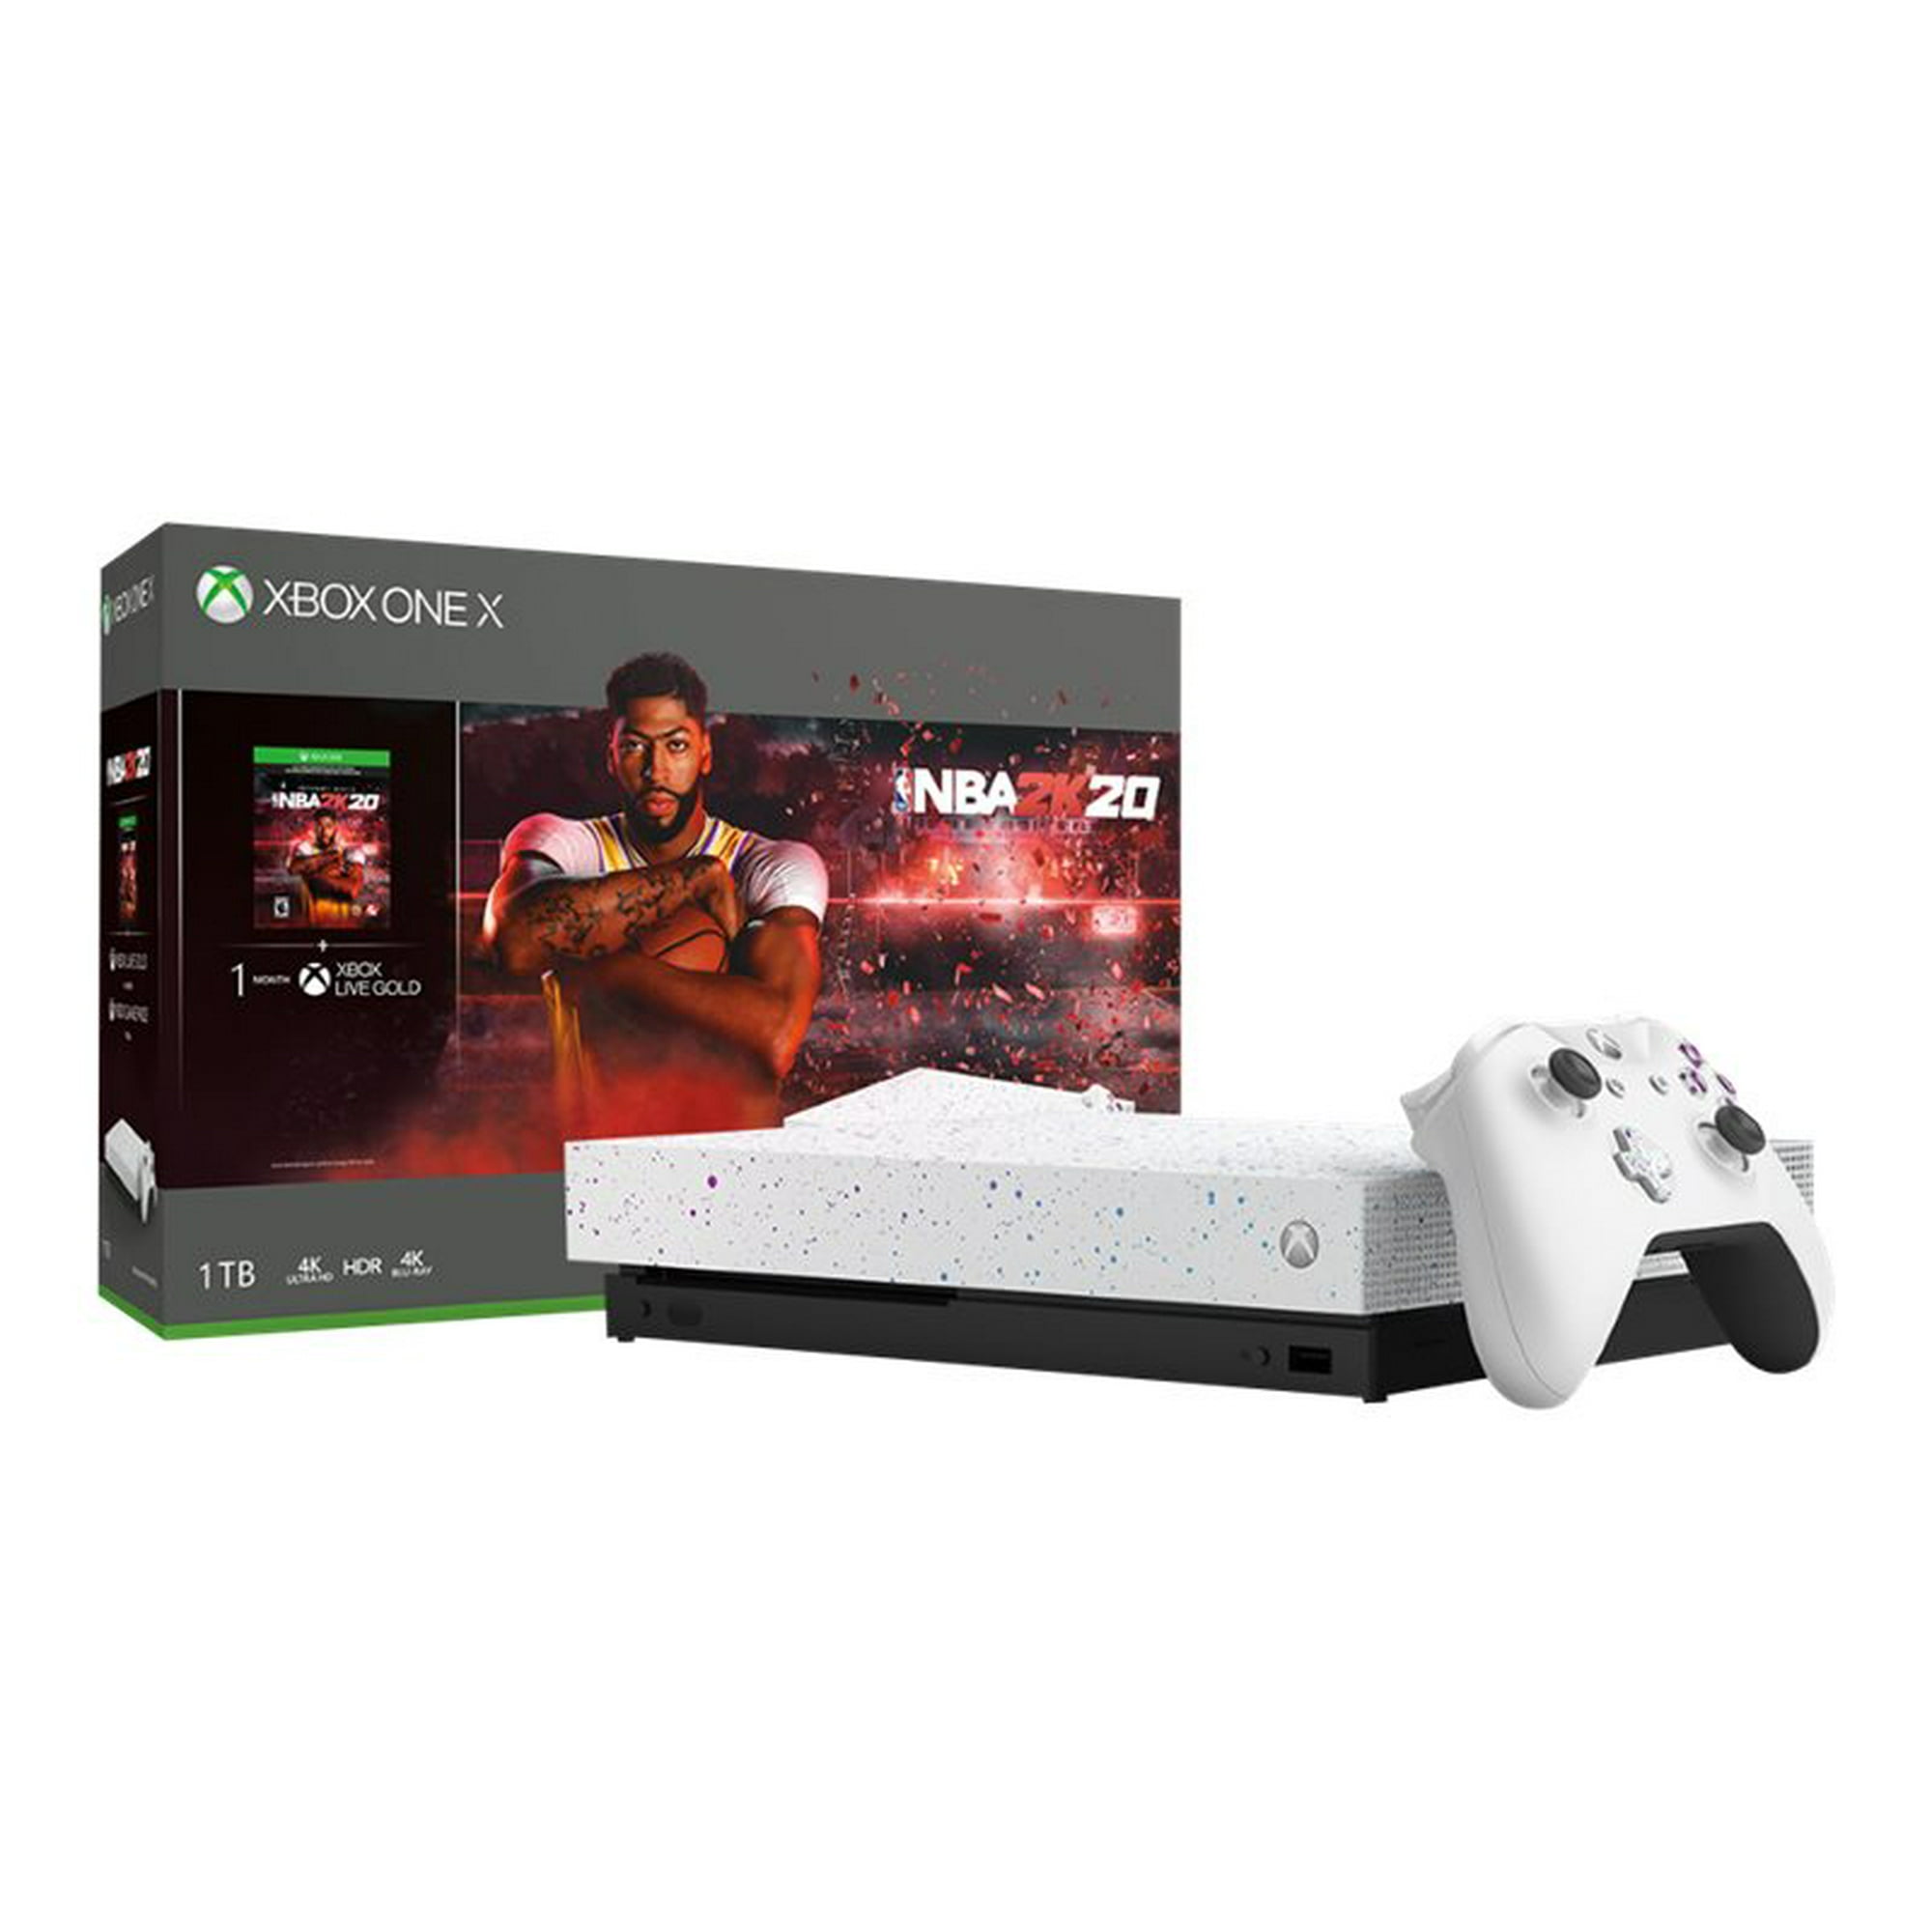 Microsoft Xbox One S 1TB Console with NBA 2K20 and Bonus Game